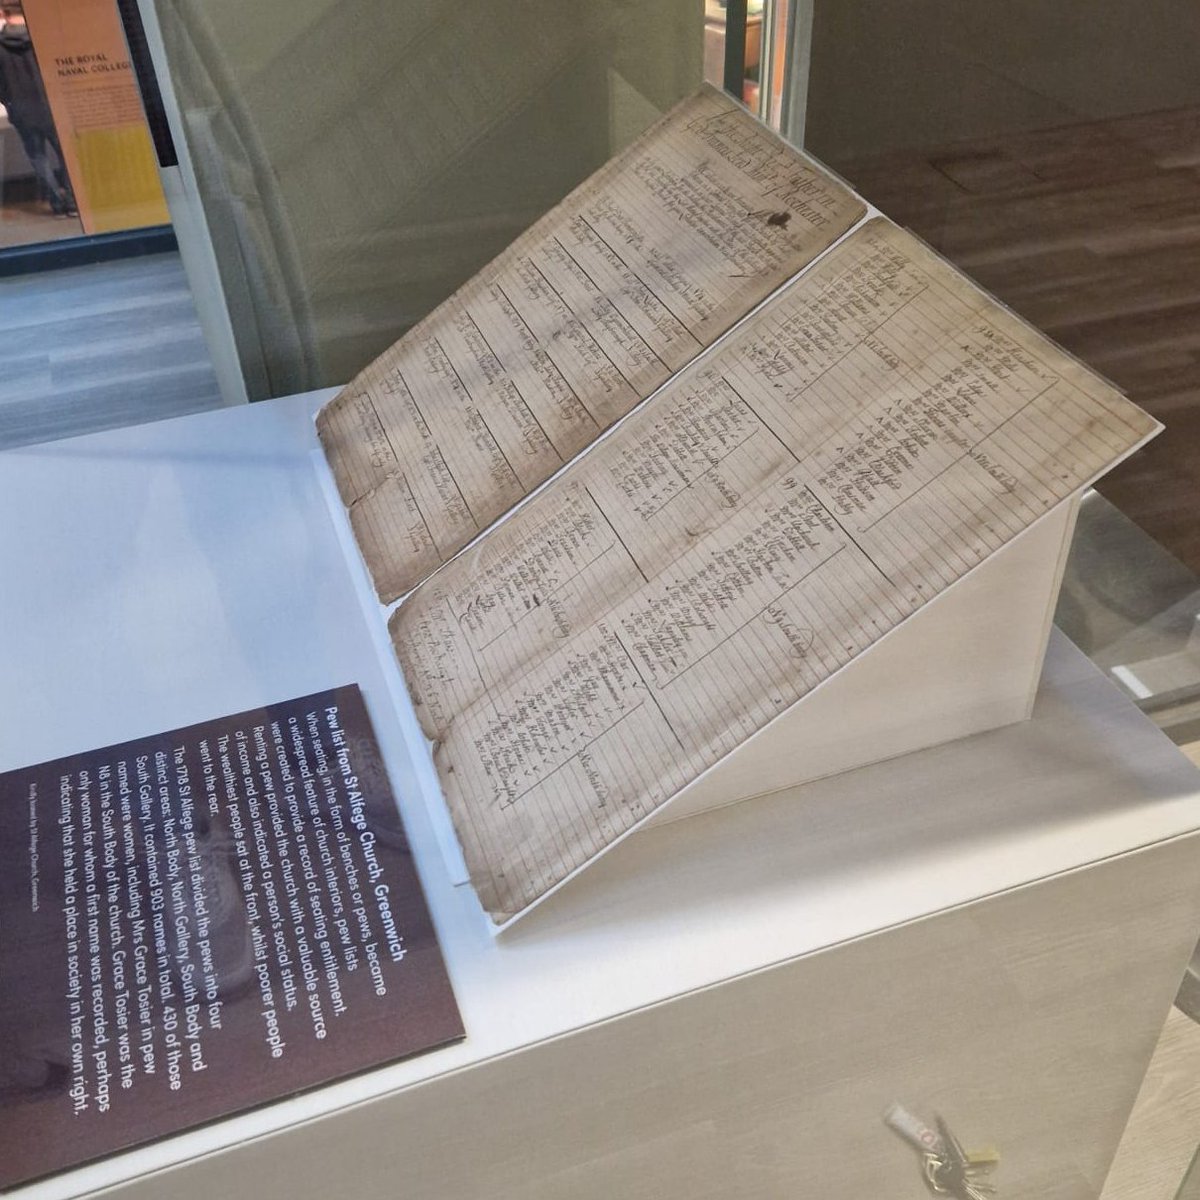 Don't miss the chance to visit the #ChocolateHouseGreenwich exhibition at the @orncgreenwich, featuring a rare Pew List from St Alfege Church's archive! We are thrilled to see it beautifully displayed, interpreted and valued - a prominent item in the exhibition.